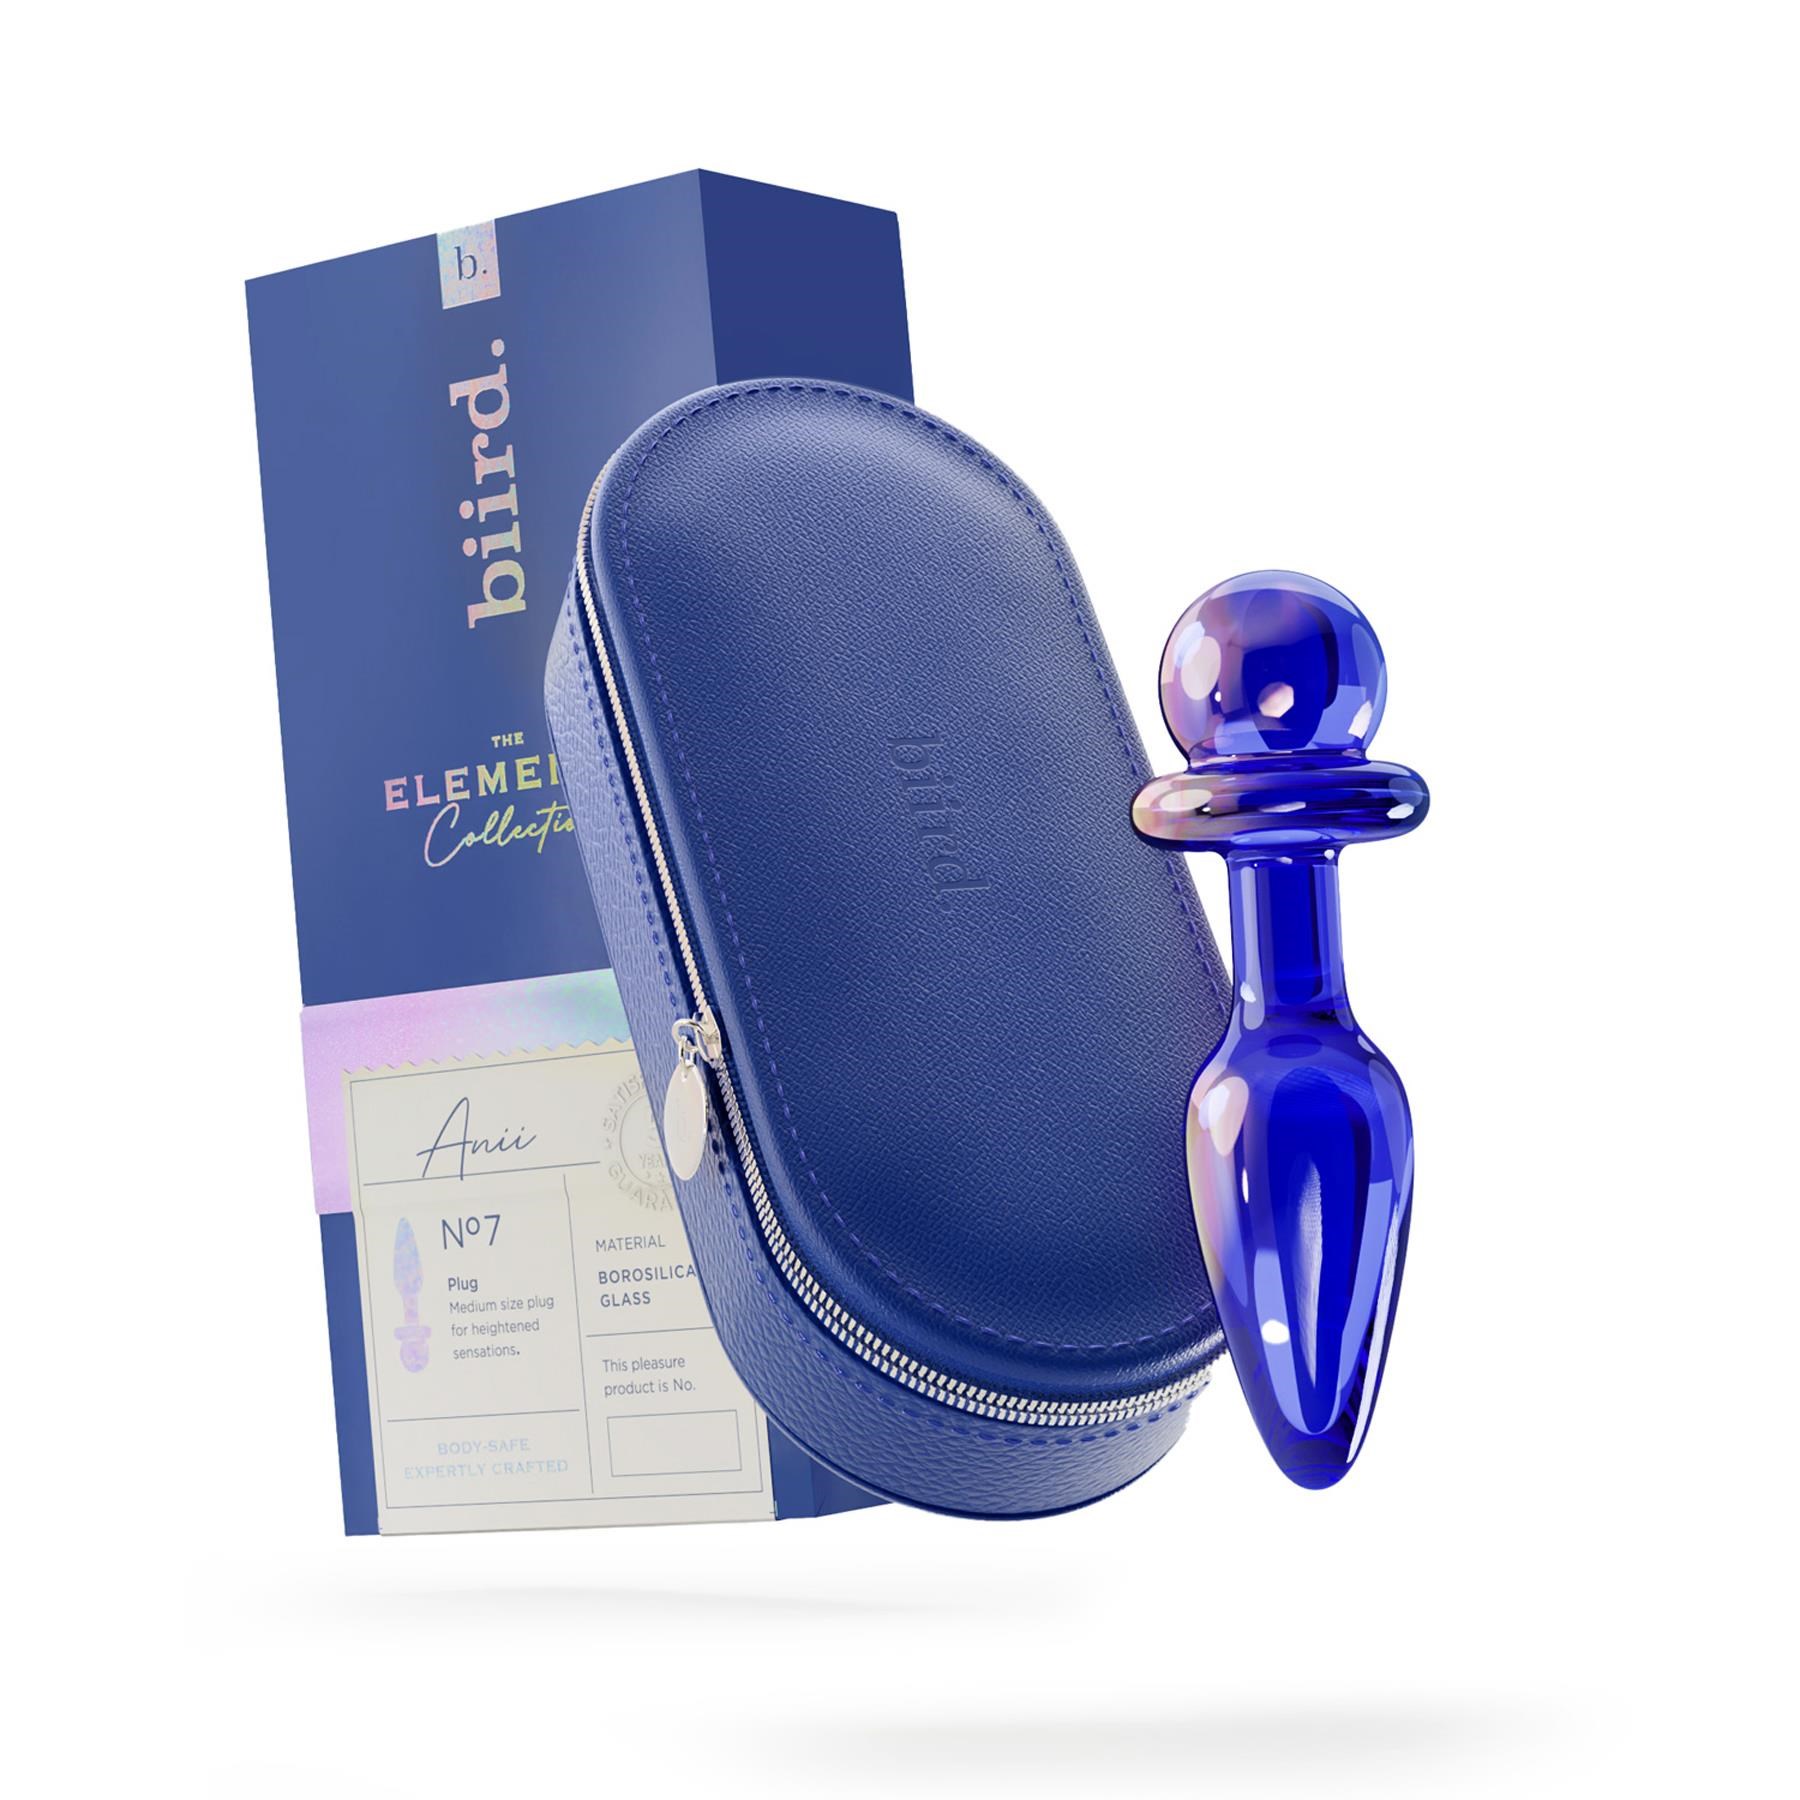 Biird Anii Glass Anal Plug - Product and Packaging